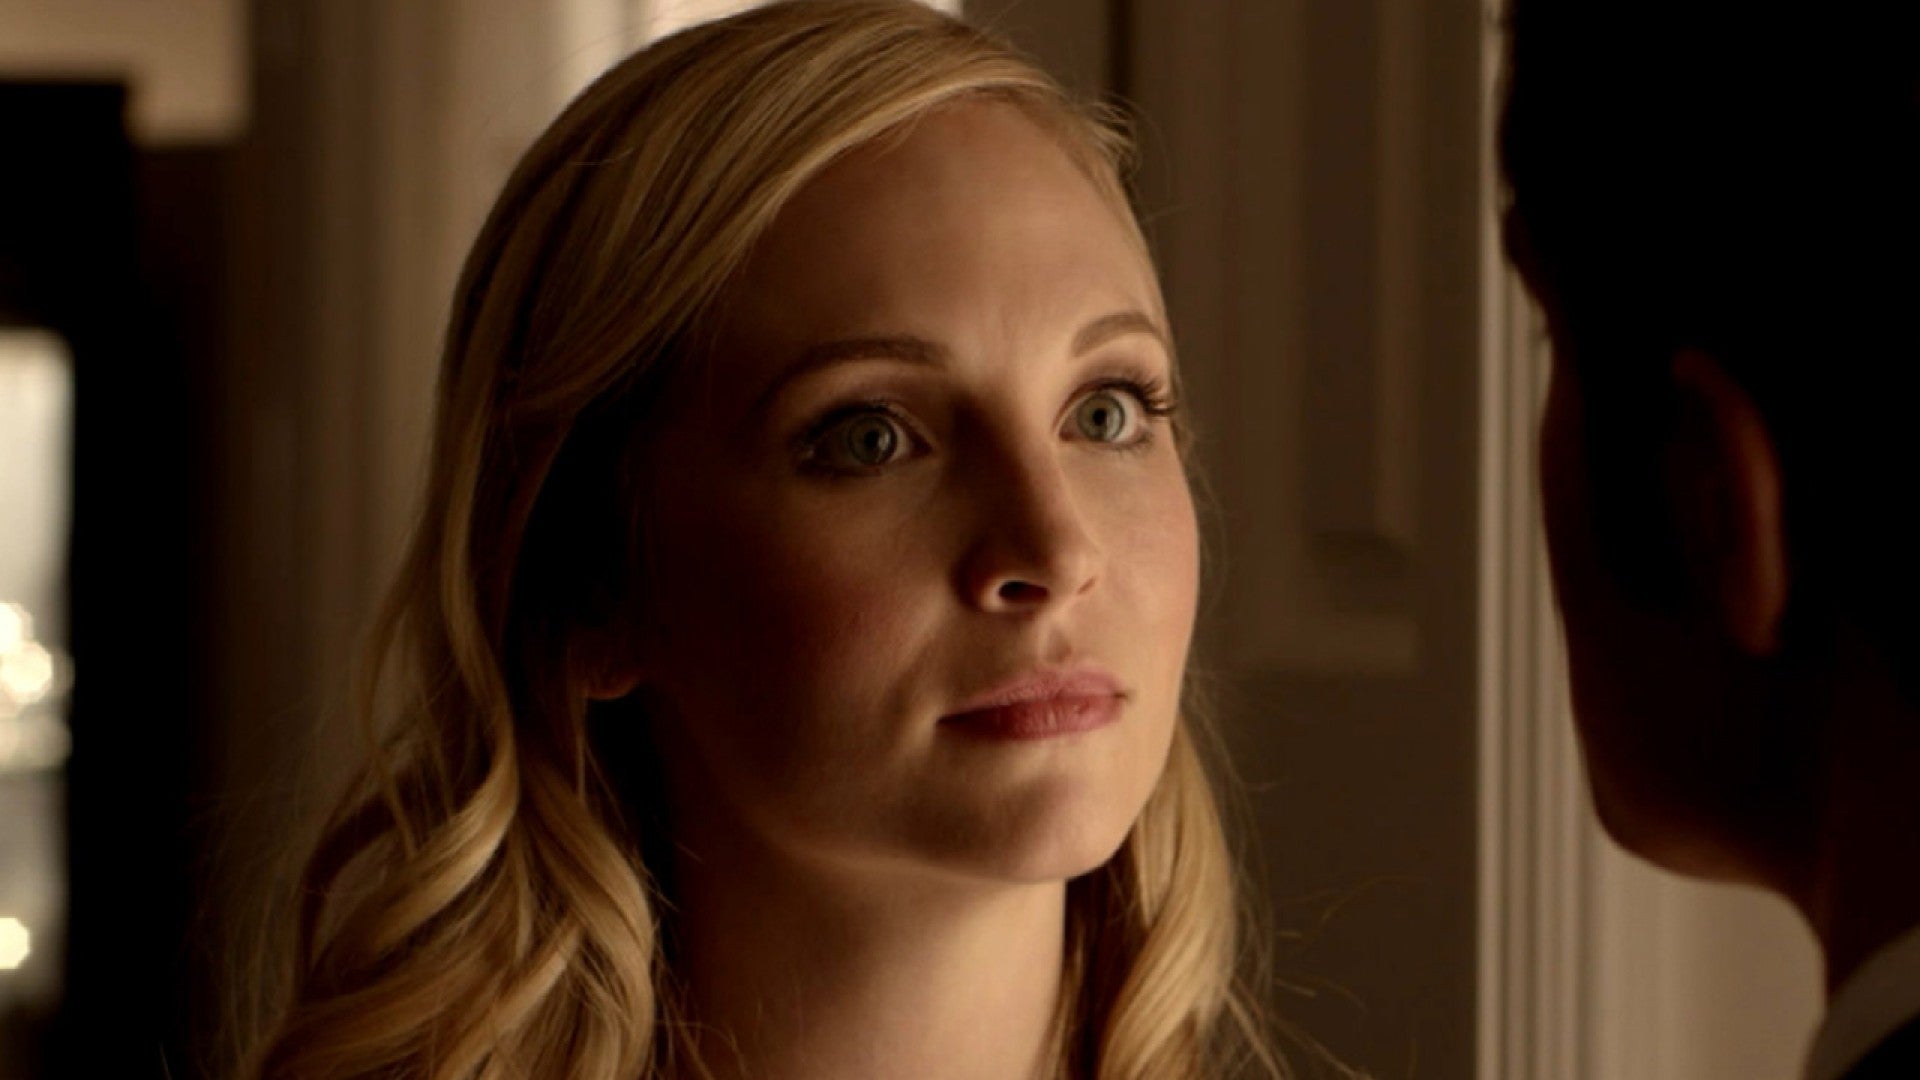 Where The Vampire Diaries' Caroline is now - divorce, singer and